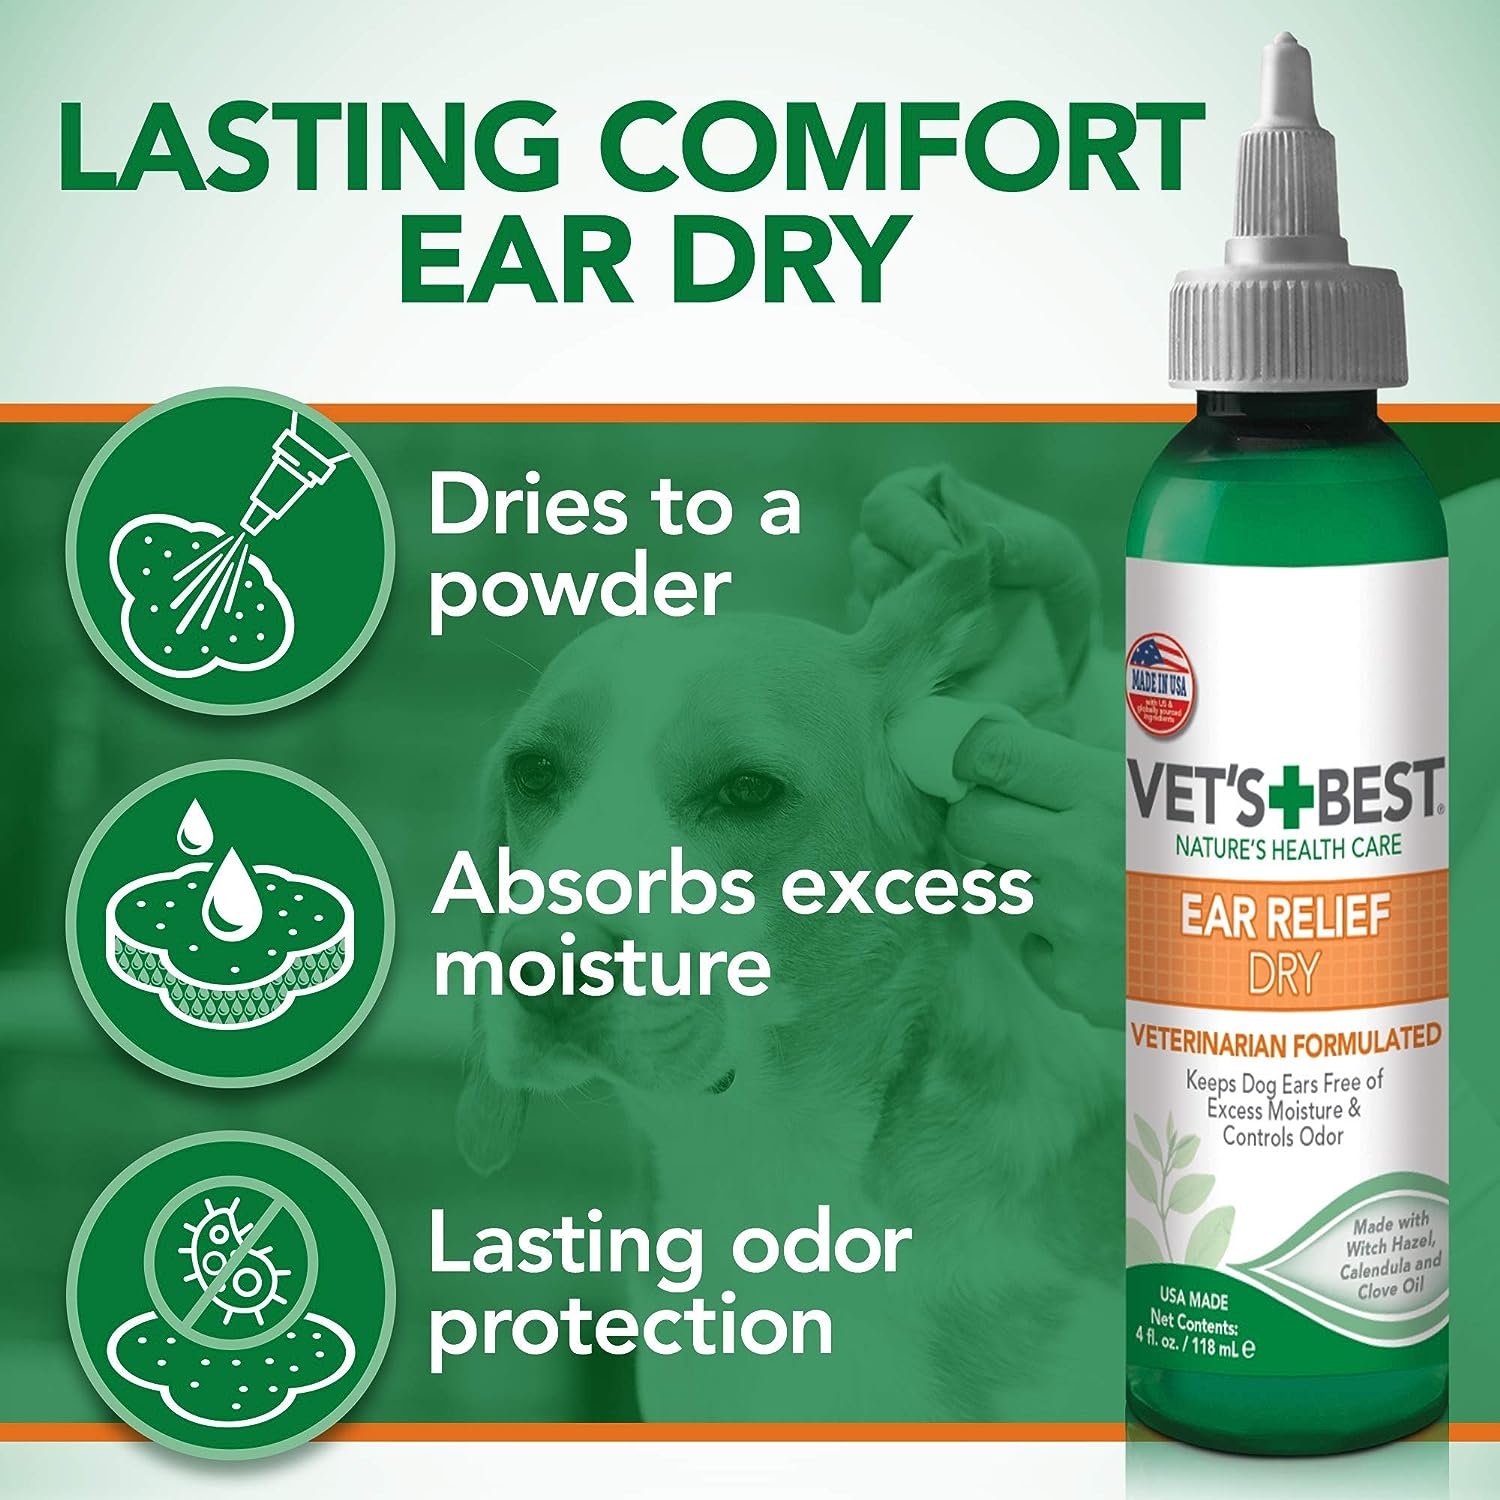 Ear Relief Dry (4oz)